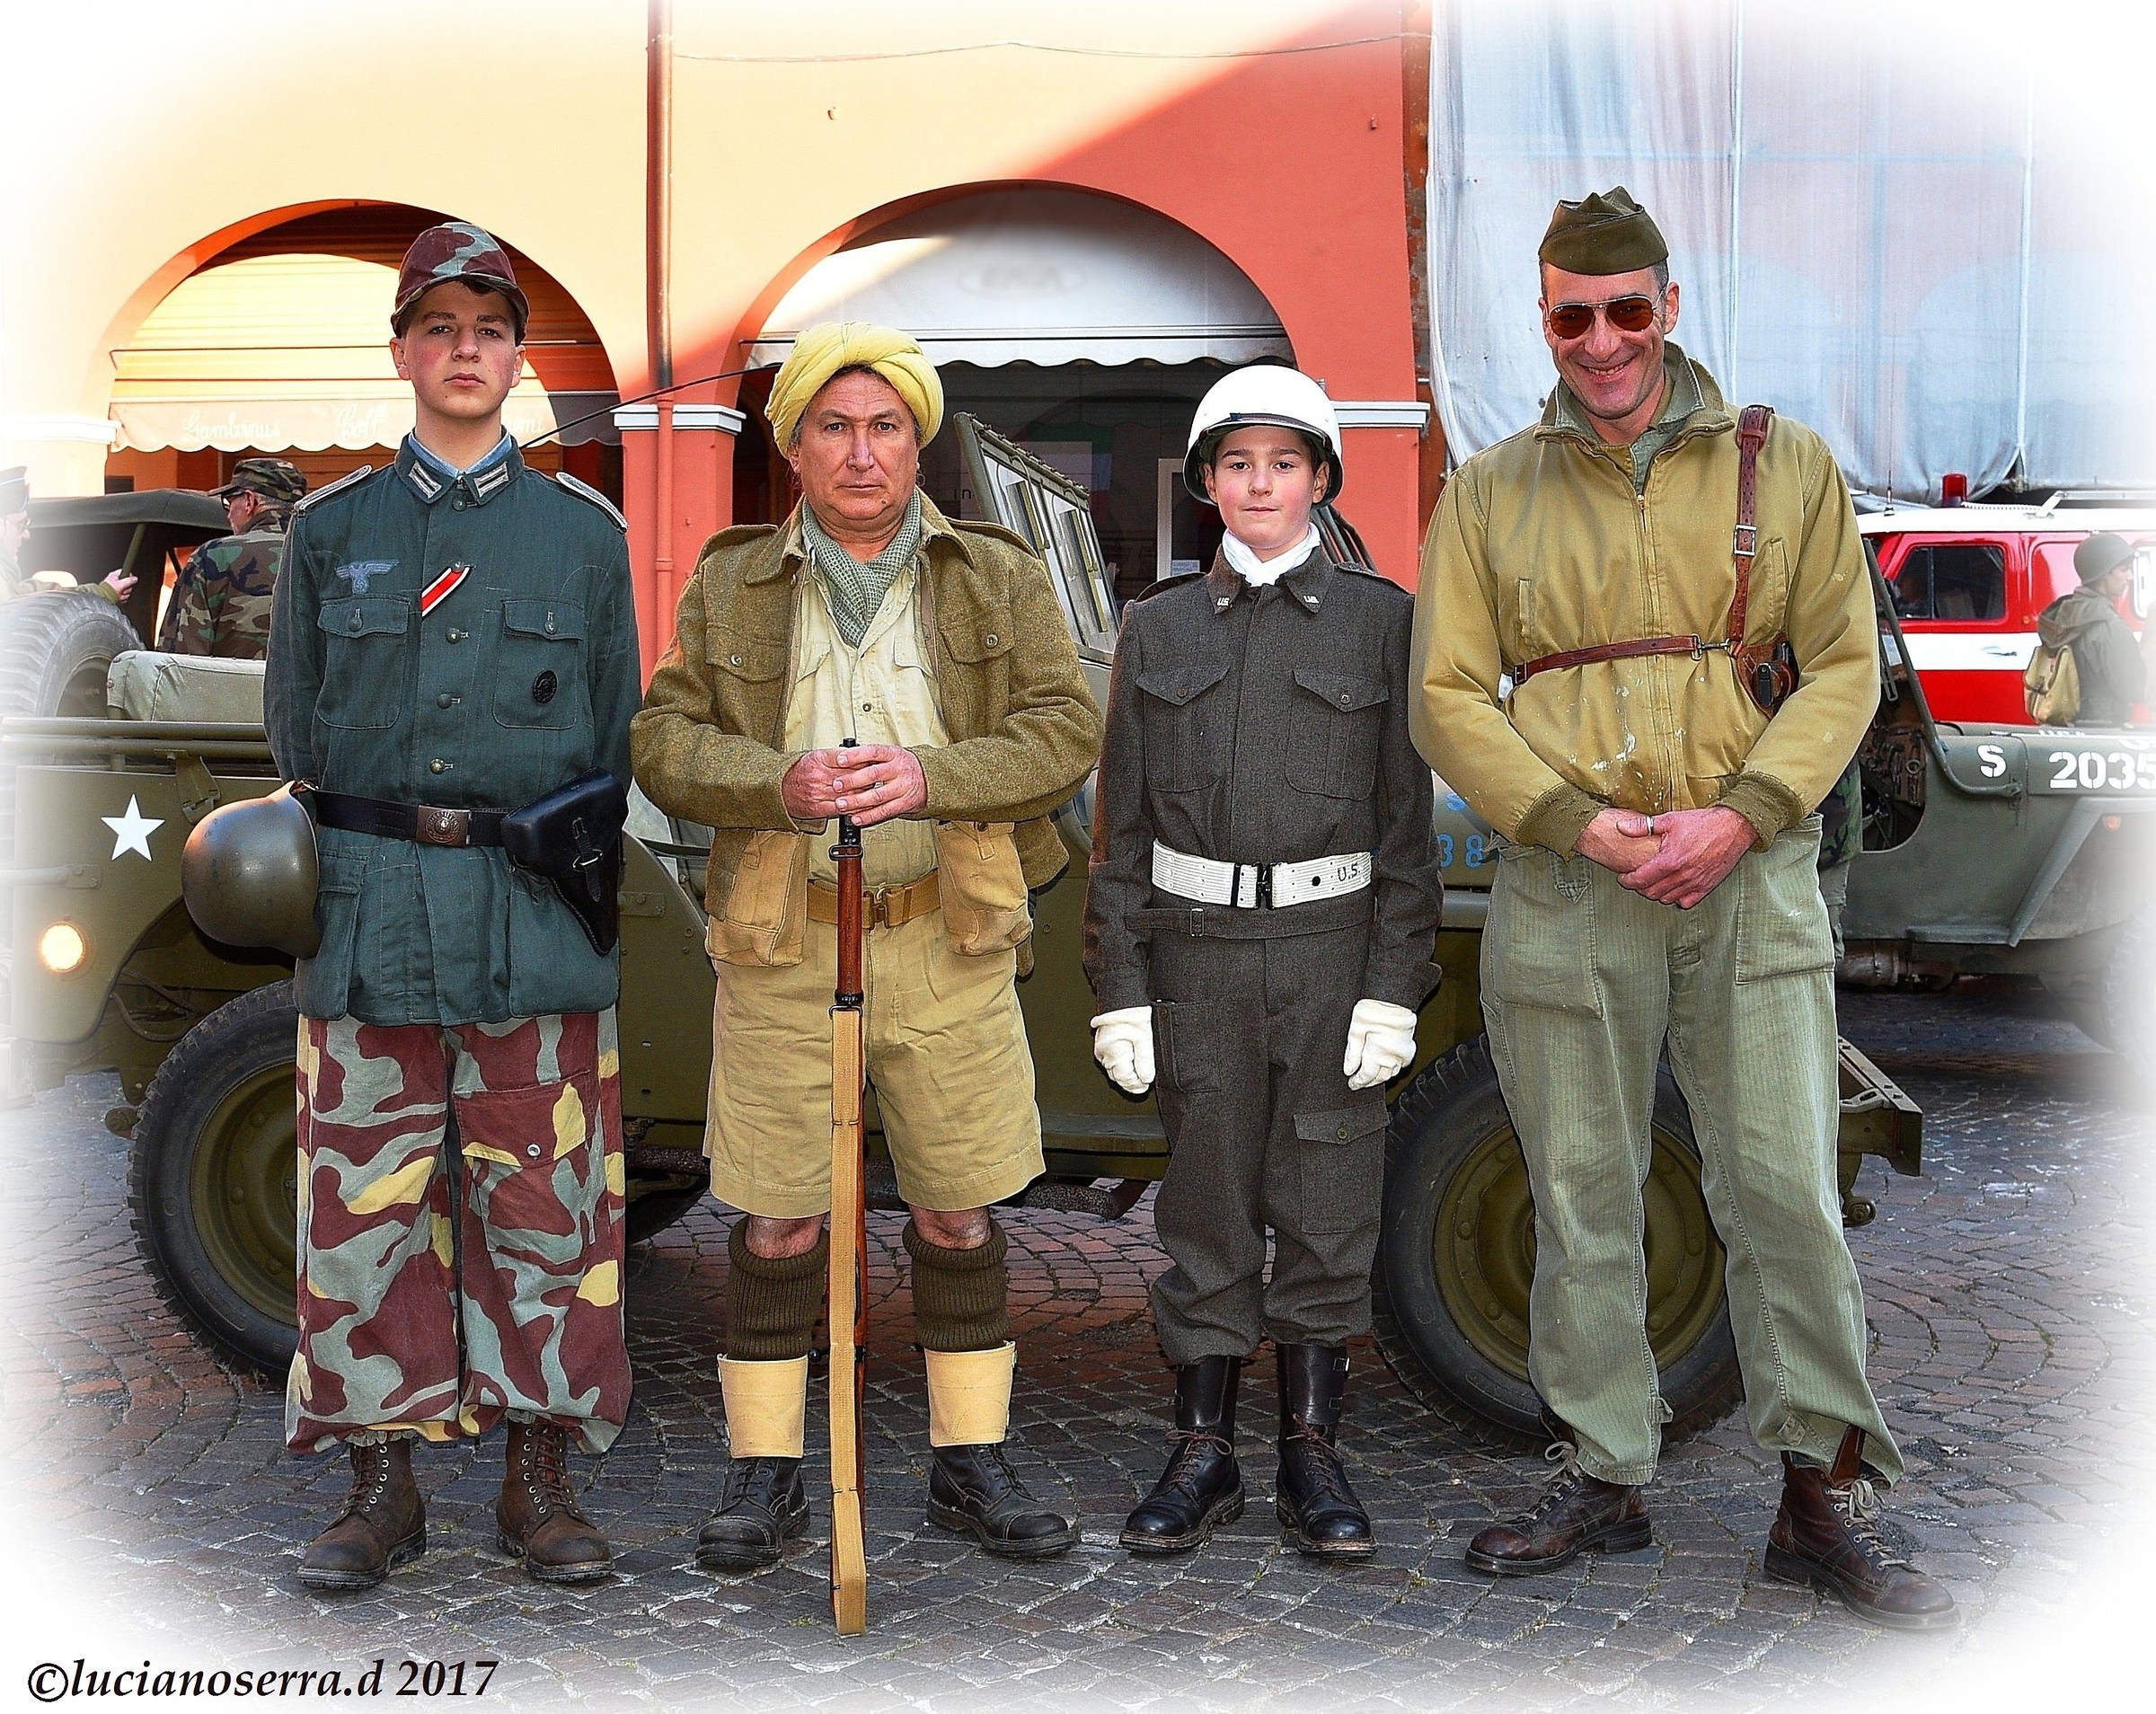 Appearing with military uniforms of World War II...